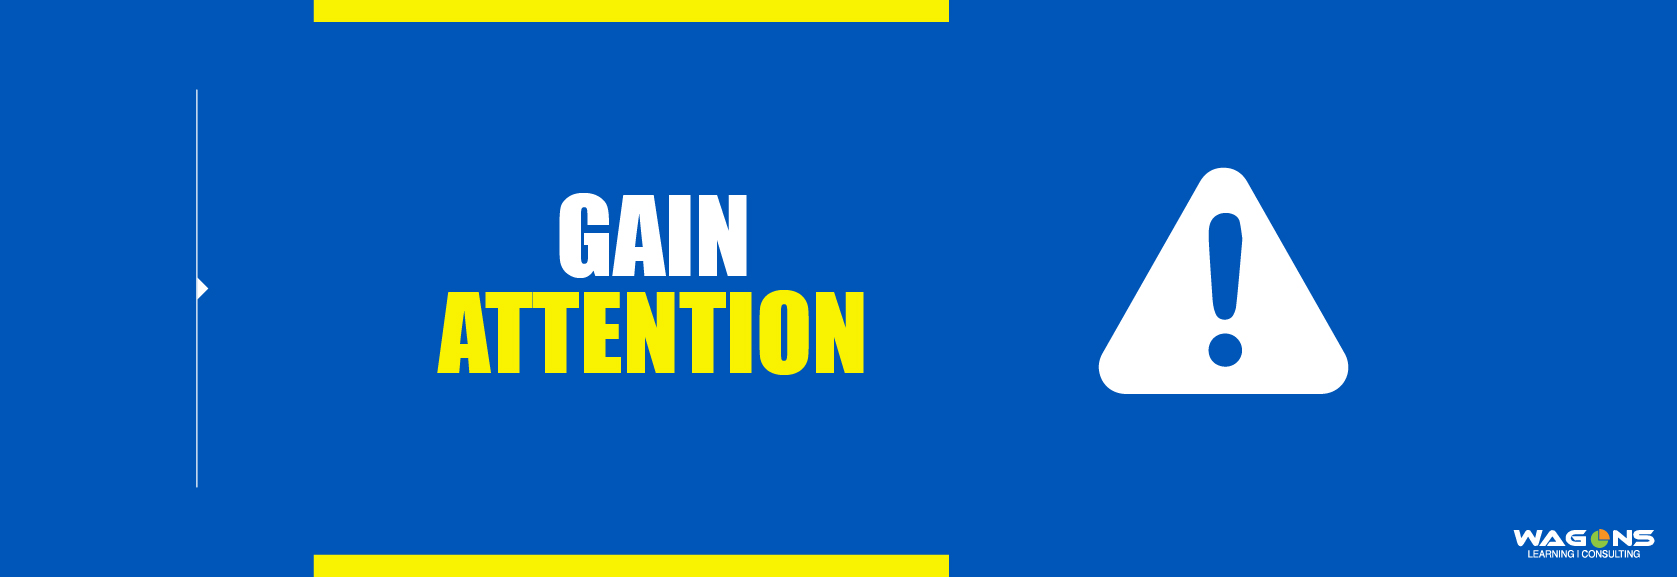 Gain Attention